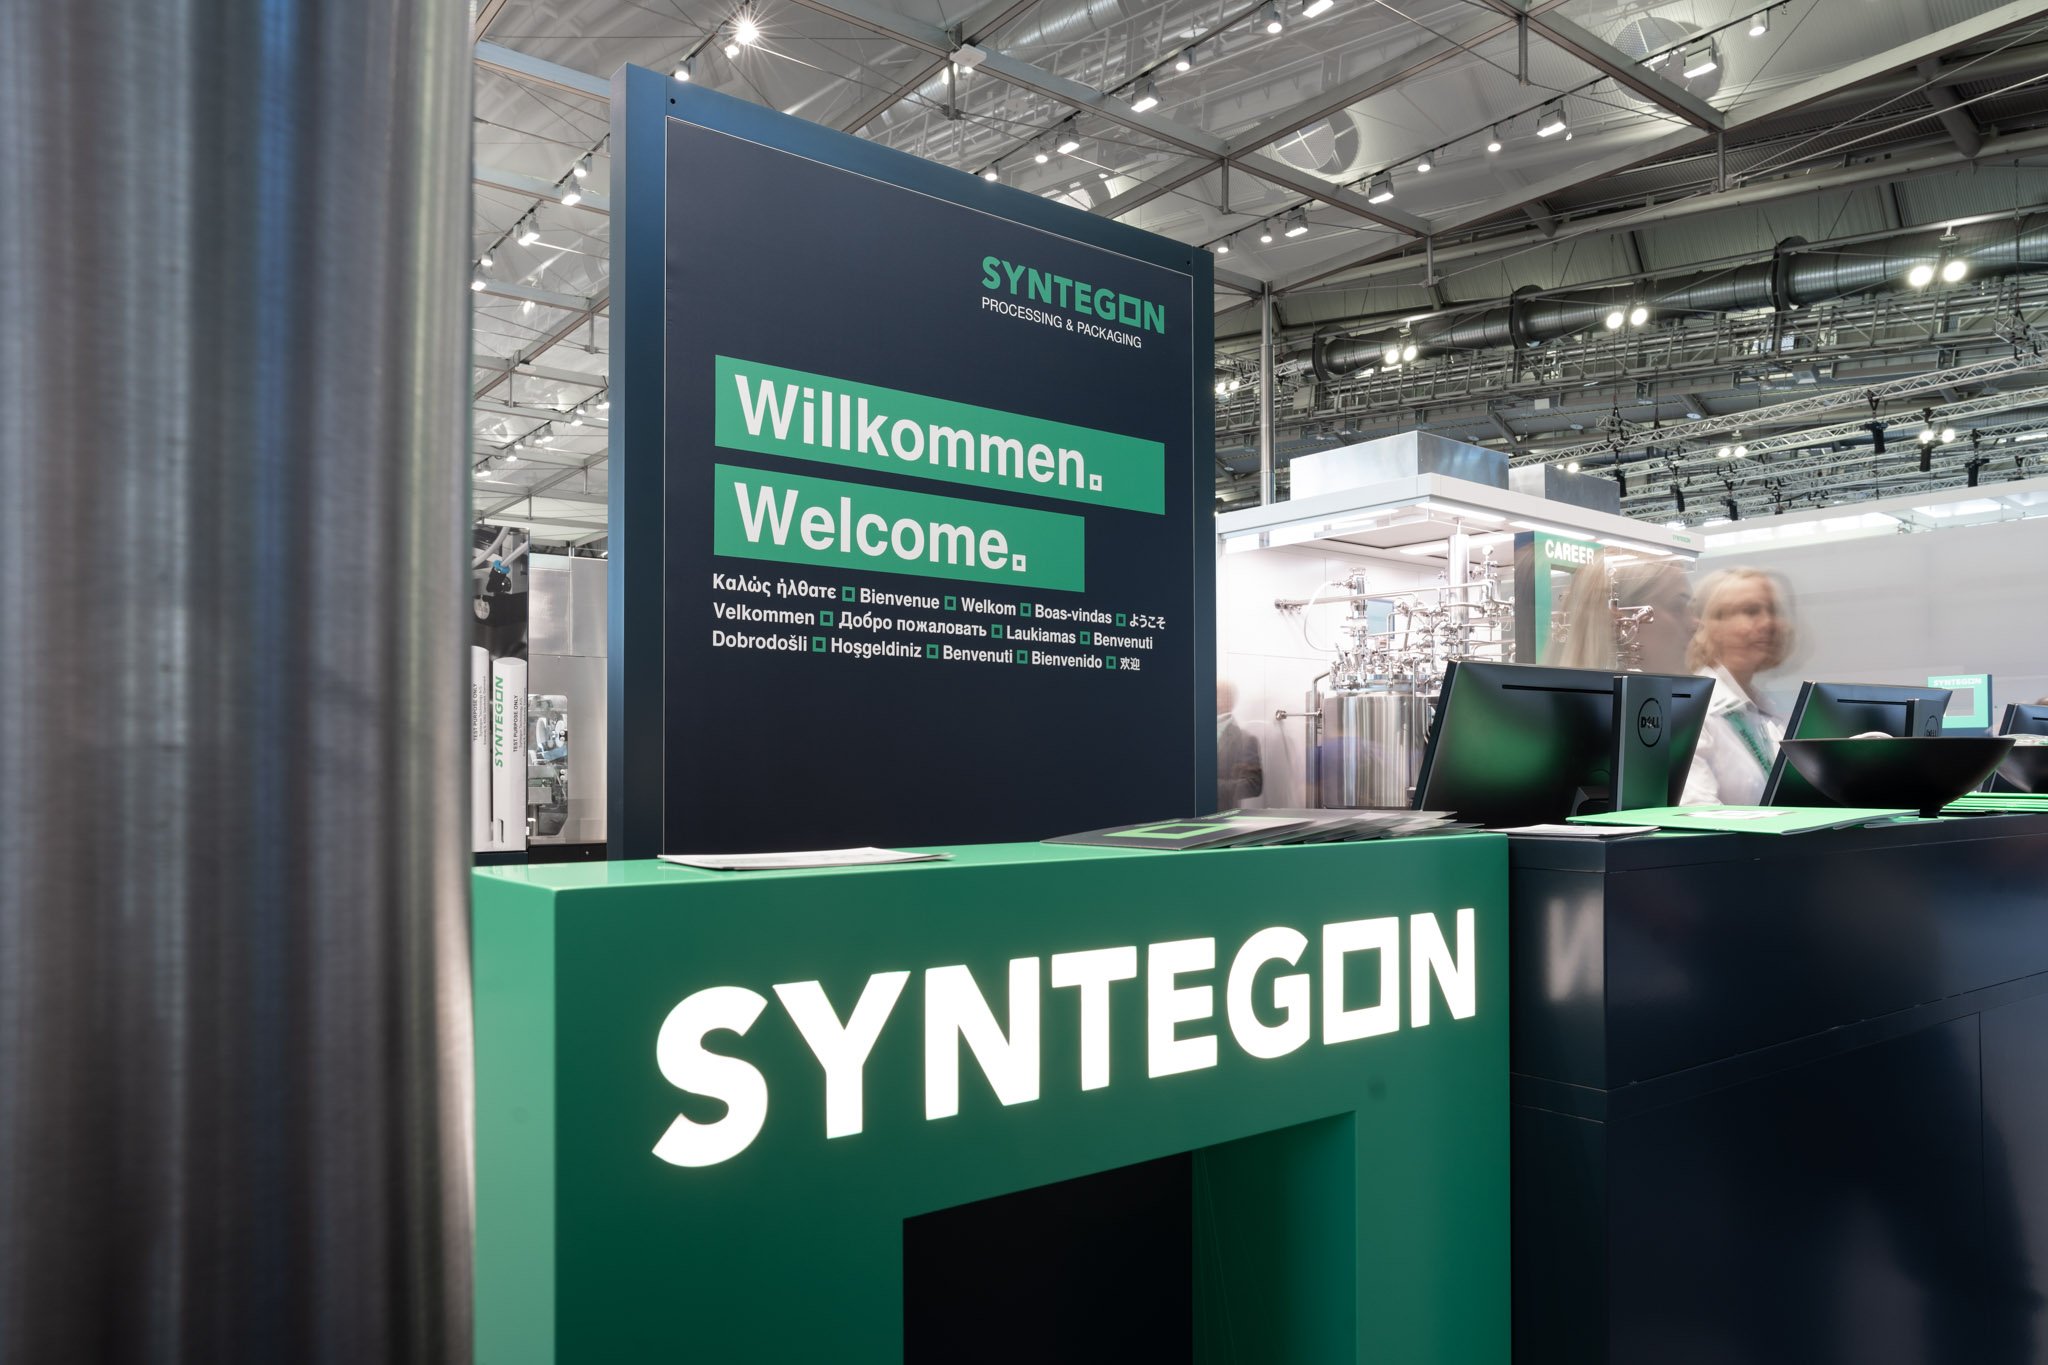 Syntegon presents innovative solutions at the world's leading trade fair for the process industry in Frankfurt, Germany.